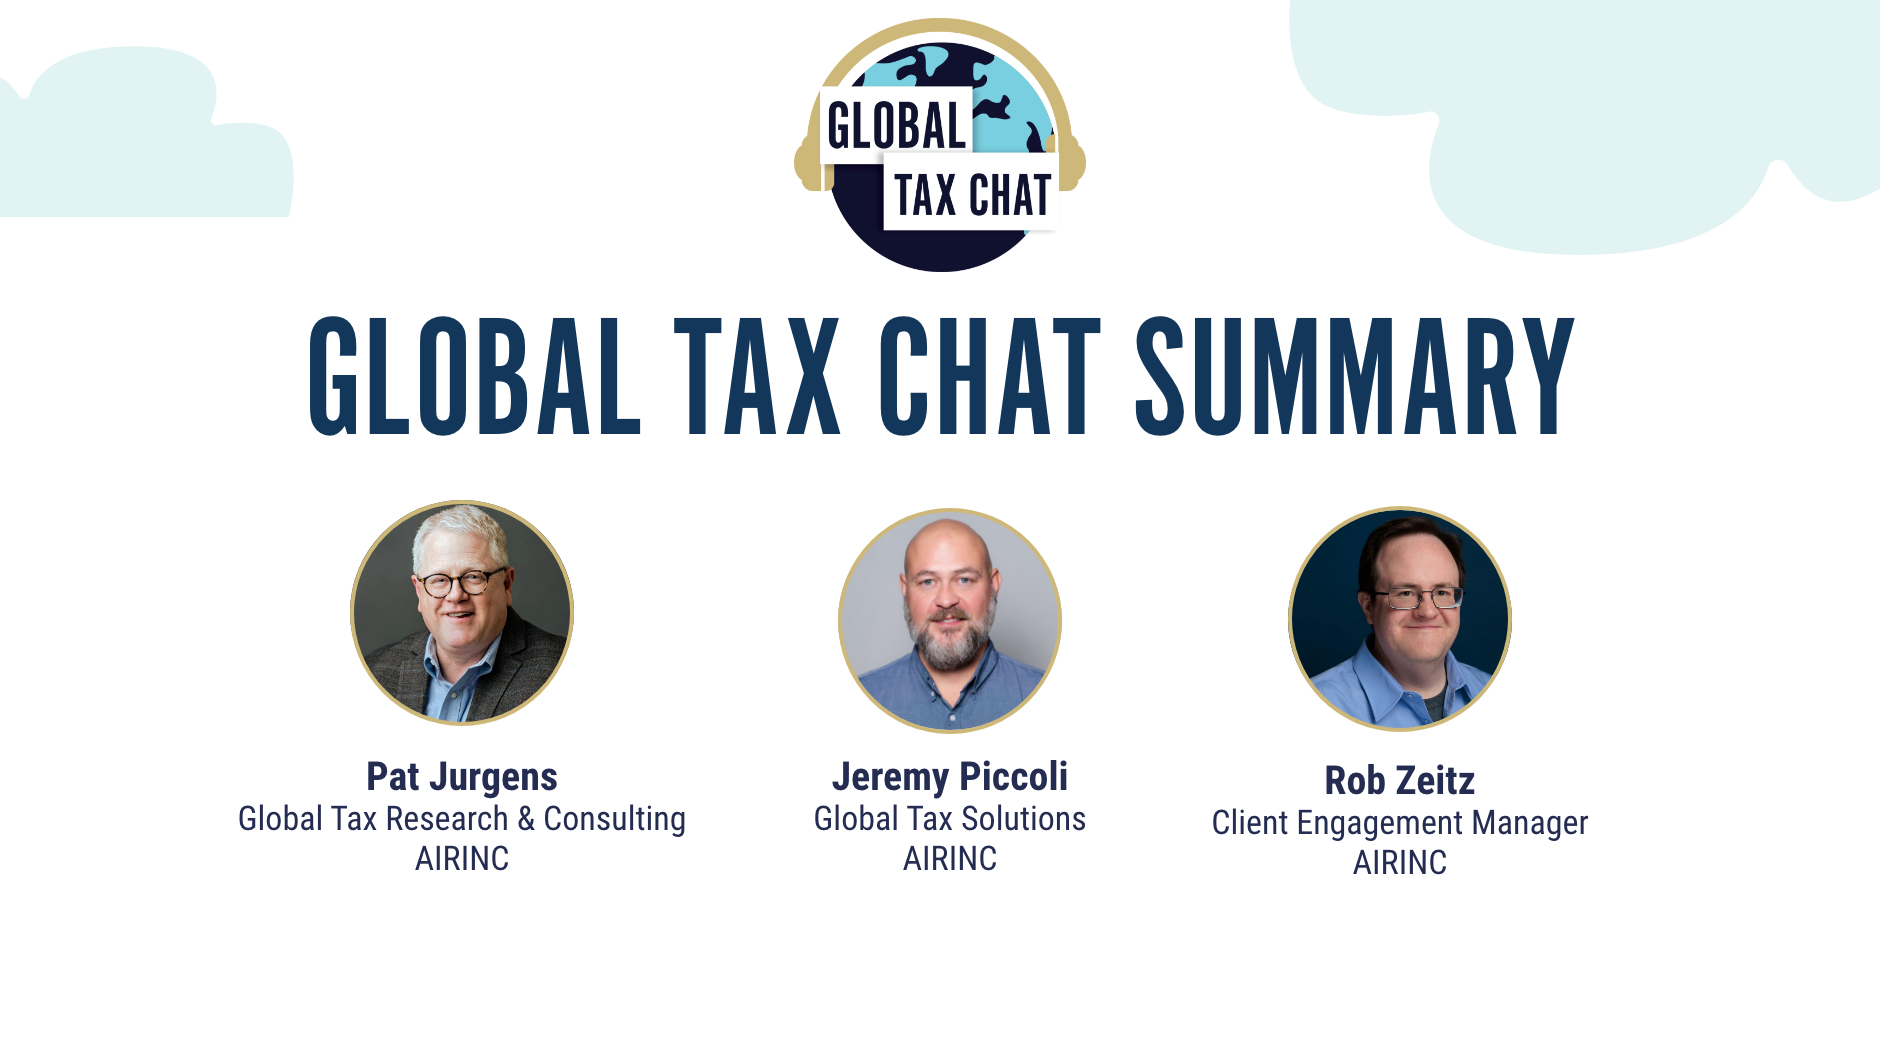 Pat, Jeremy and Rob pictured on a poster for the global tax chat show